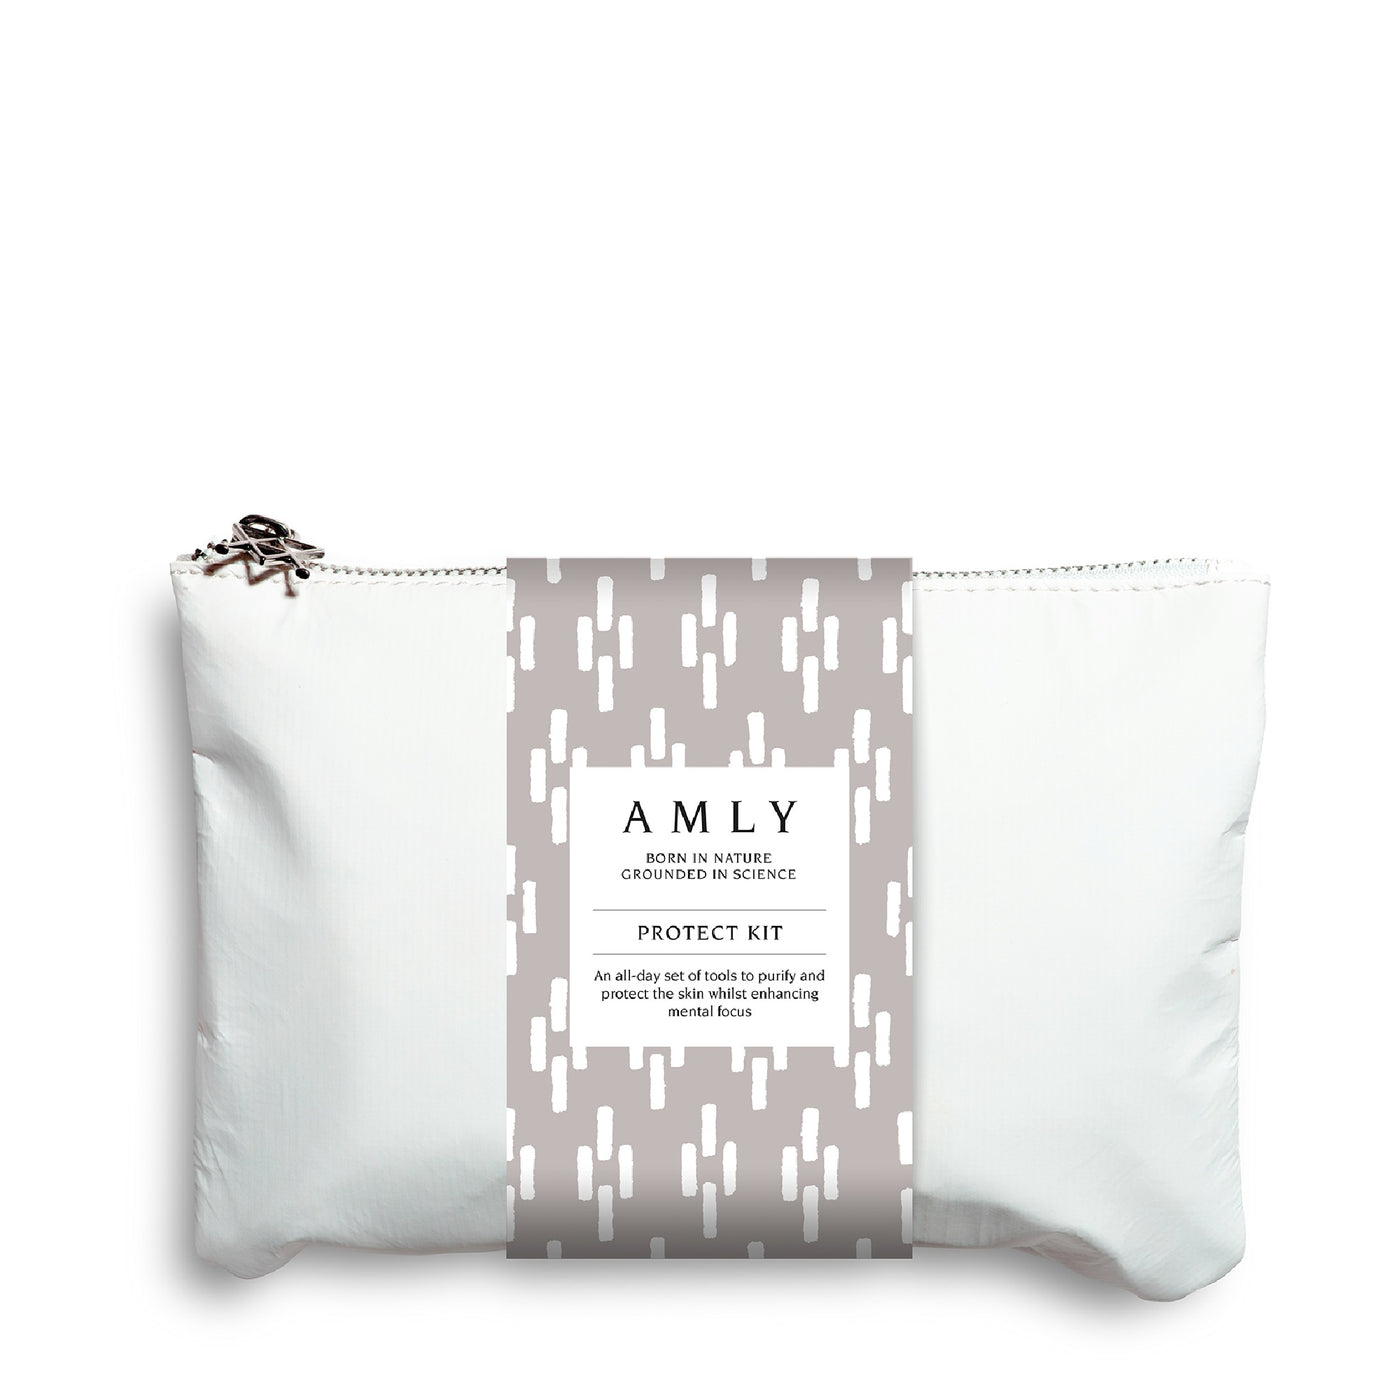 Amly Discovery Kit - Protect - 6 x Items